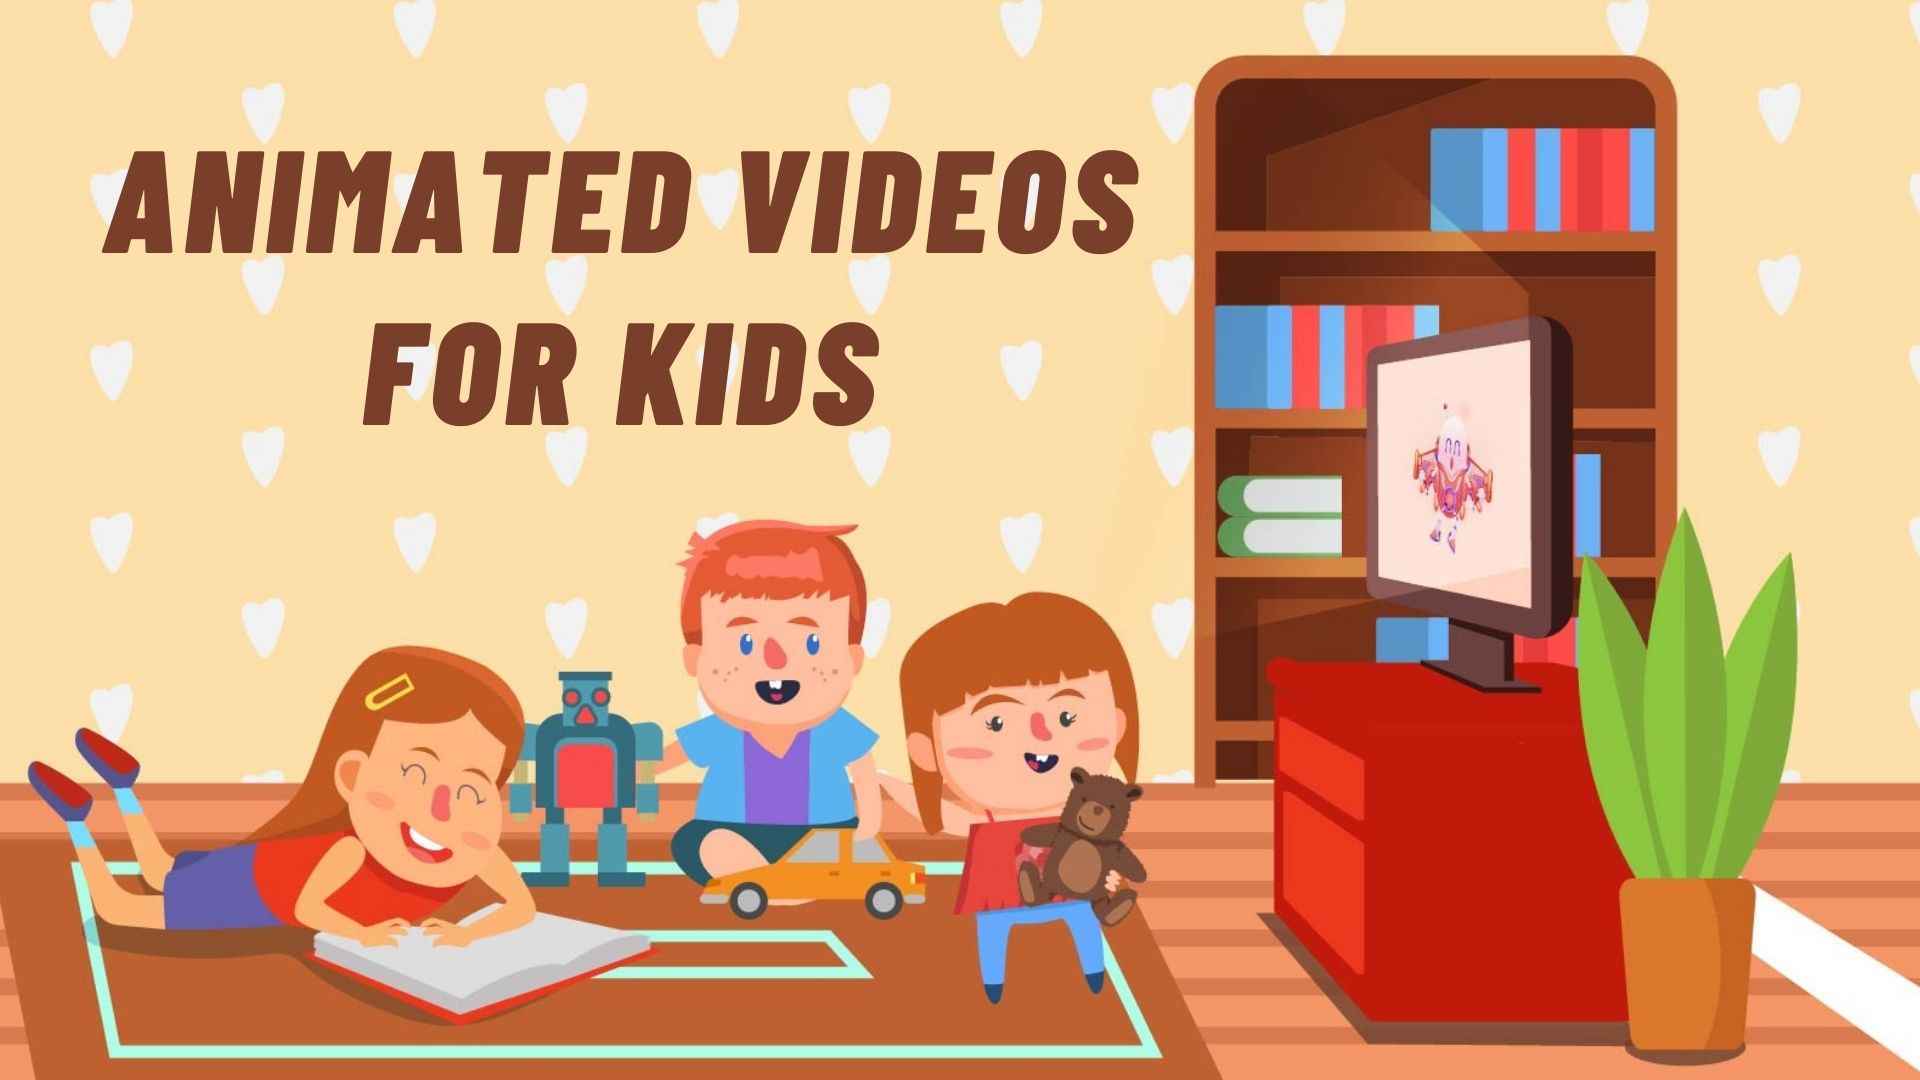 animations that move for kids